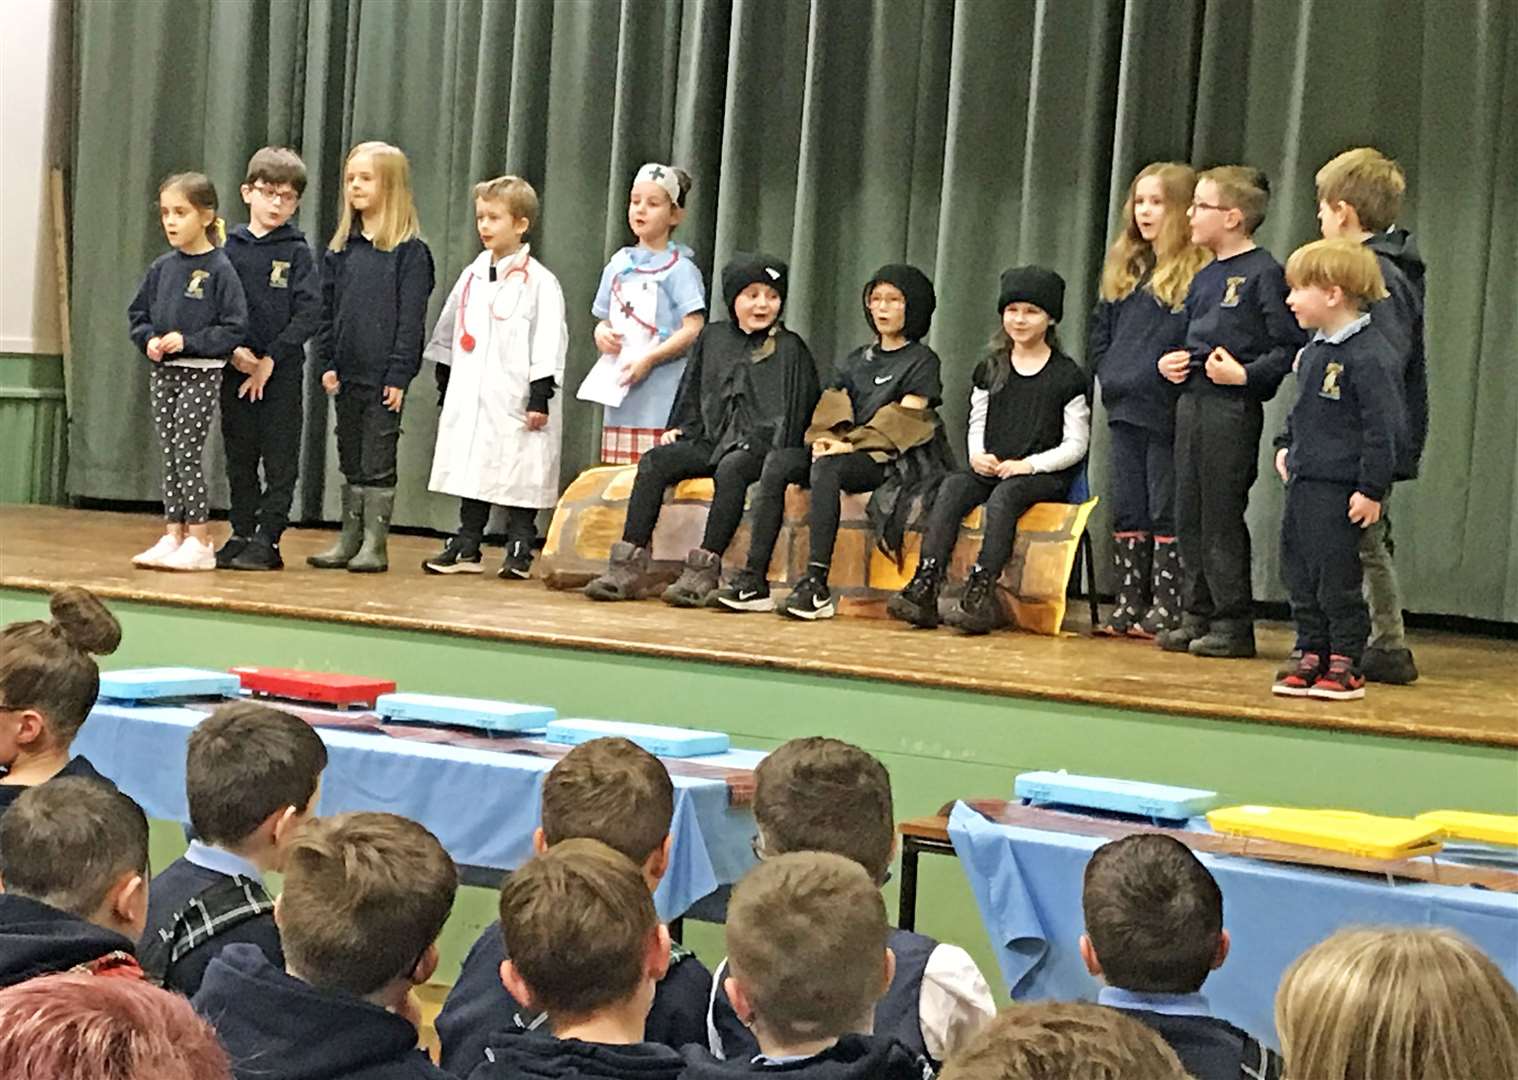 Children performing the Three Craws song at Watten.